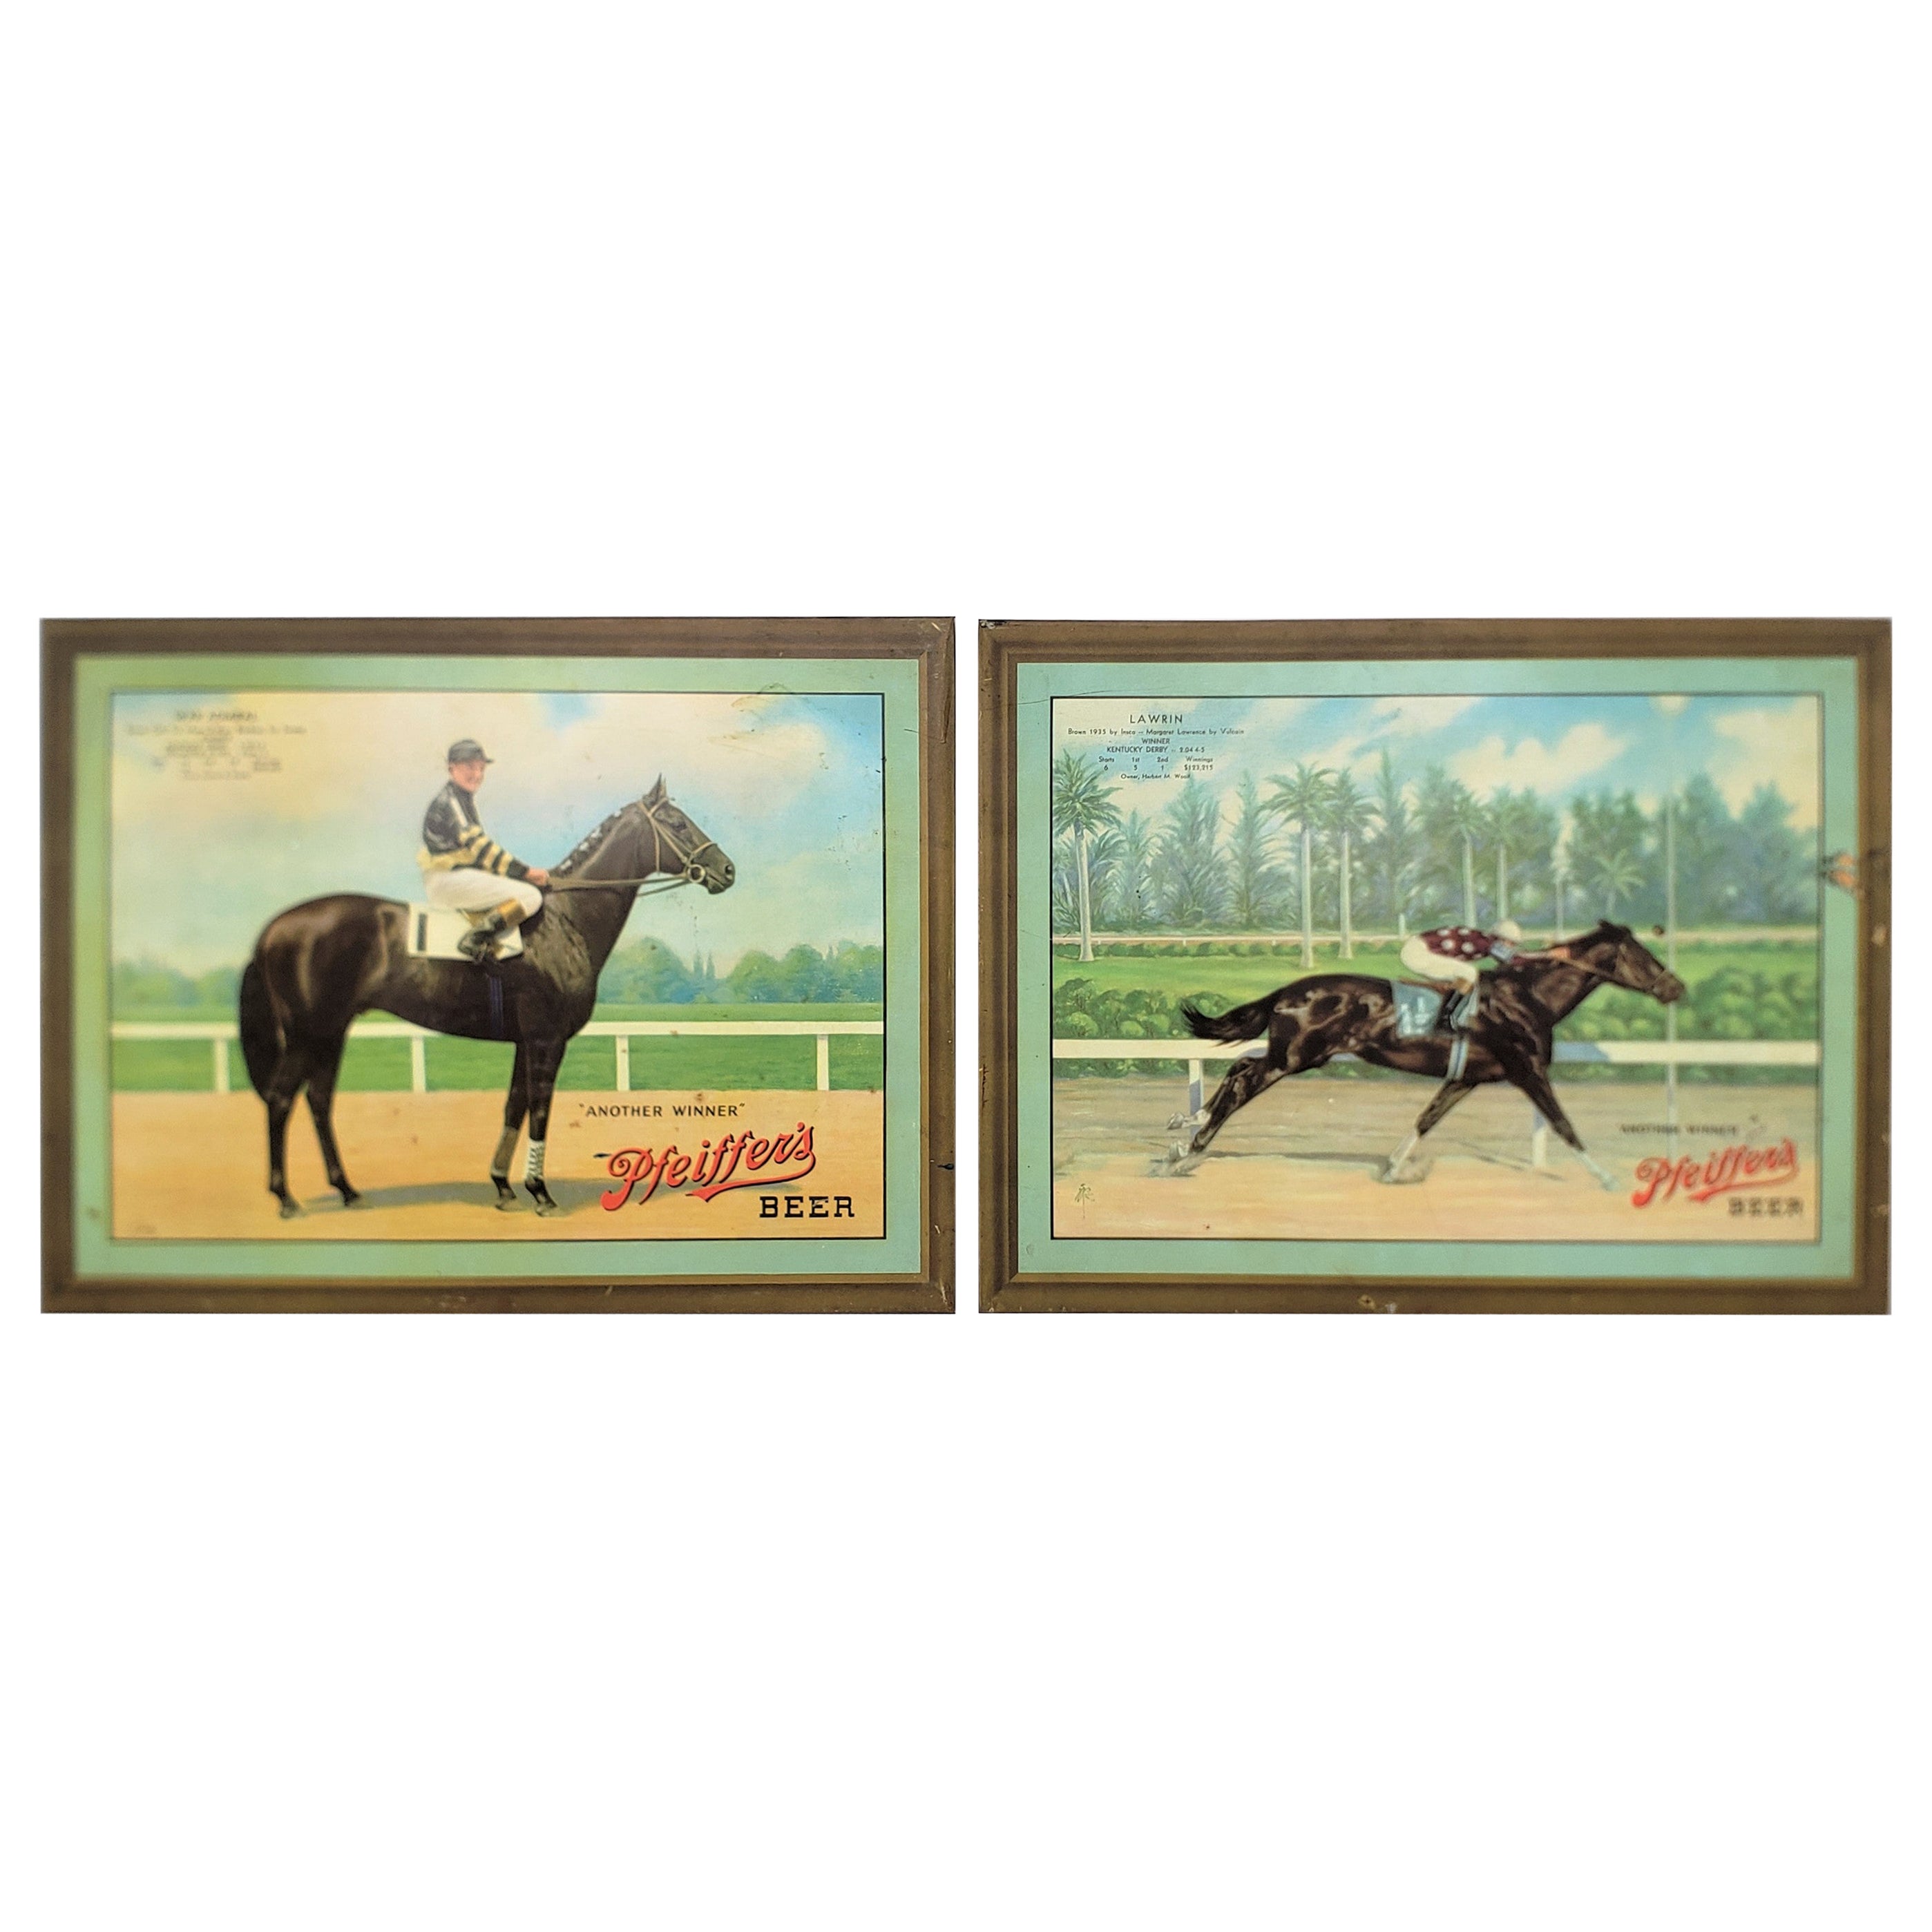 Pair of Pfeiffer's Beer Advertising Wall Hangings with a Horse Racing Theme For Sale